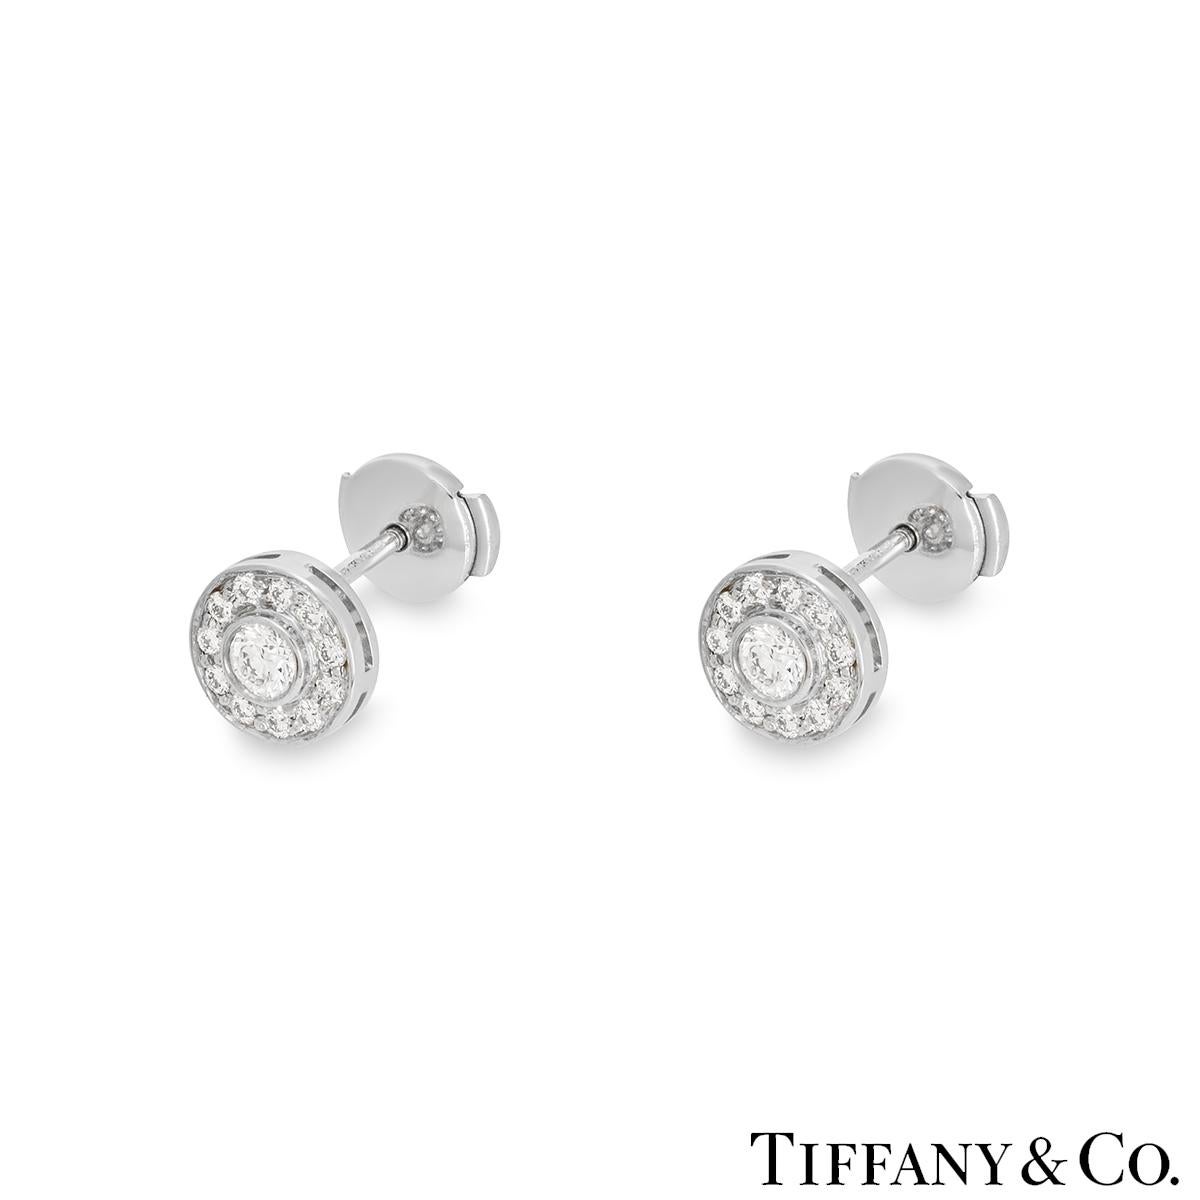 A beautiful pair of platinum diamond earrings by Tiffany & Co. from the Circlet collection. Each earring features a bezel set round brilliant cut diamond set to the centre with an approximate total weight of 0.30ct, predominately F colour and VS